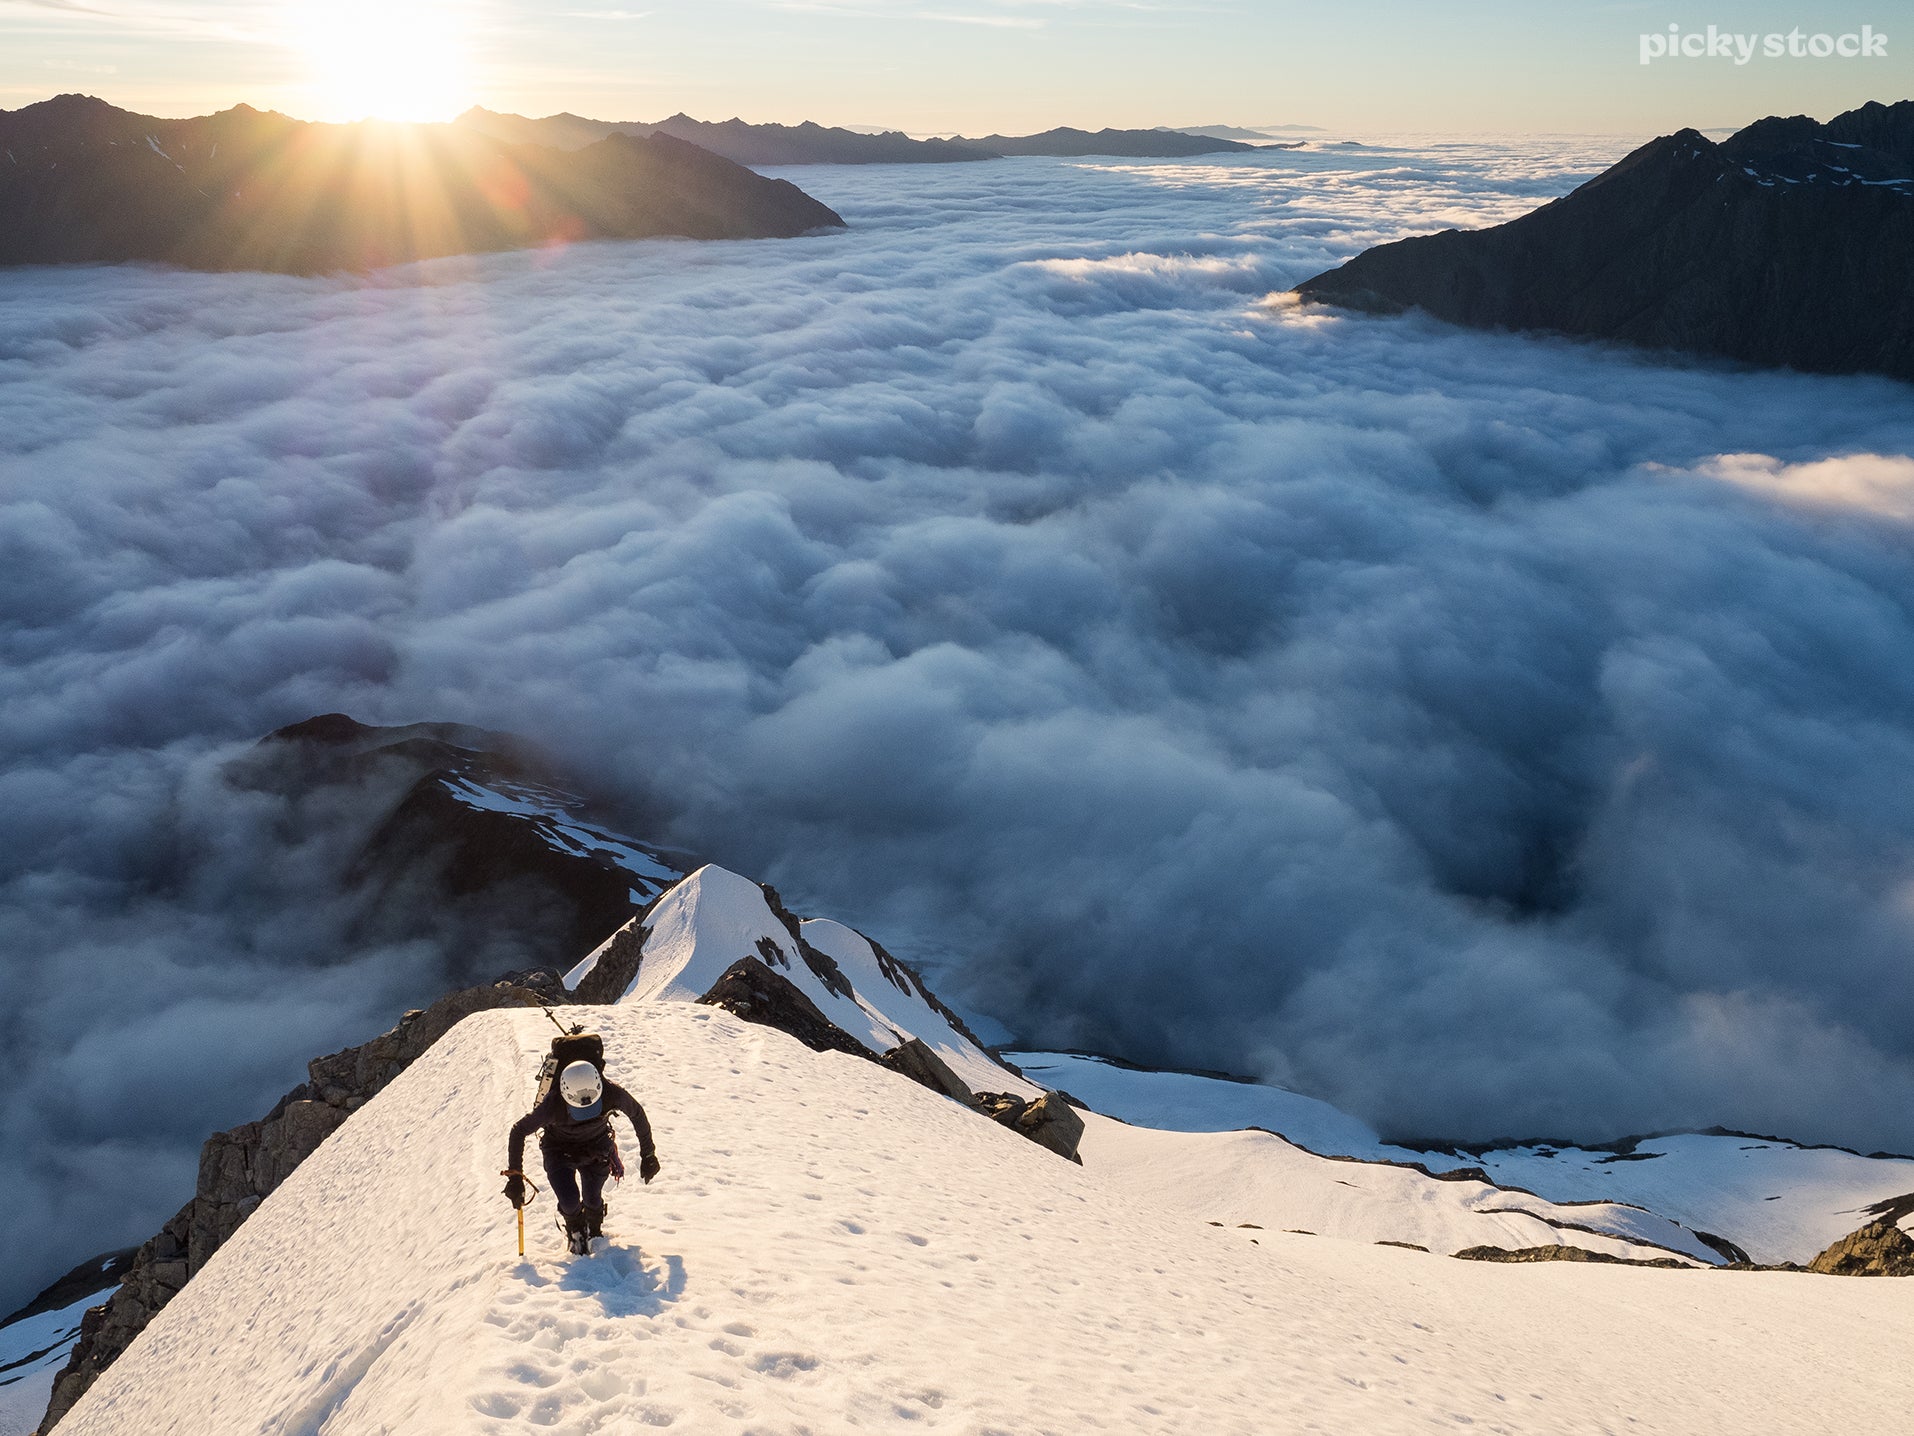 Landscape of a woman climbing a snowy mountainside, the climber advances steeply up a sharp incline well above the clouds. The sun climbs over the jagged peaks in the background, casting a warm field ahead of the climber.